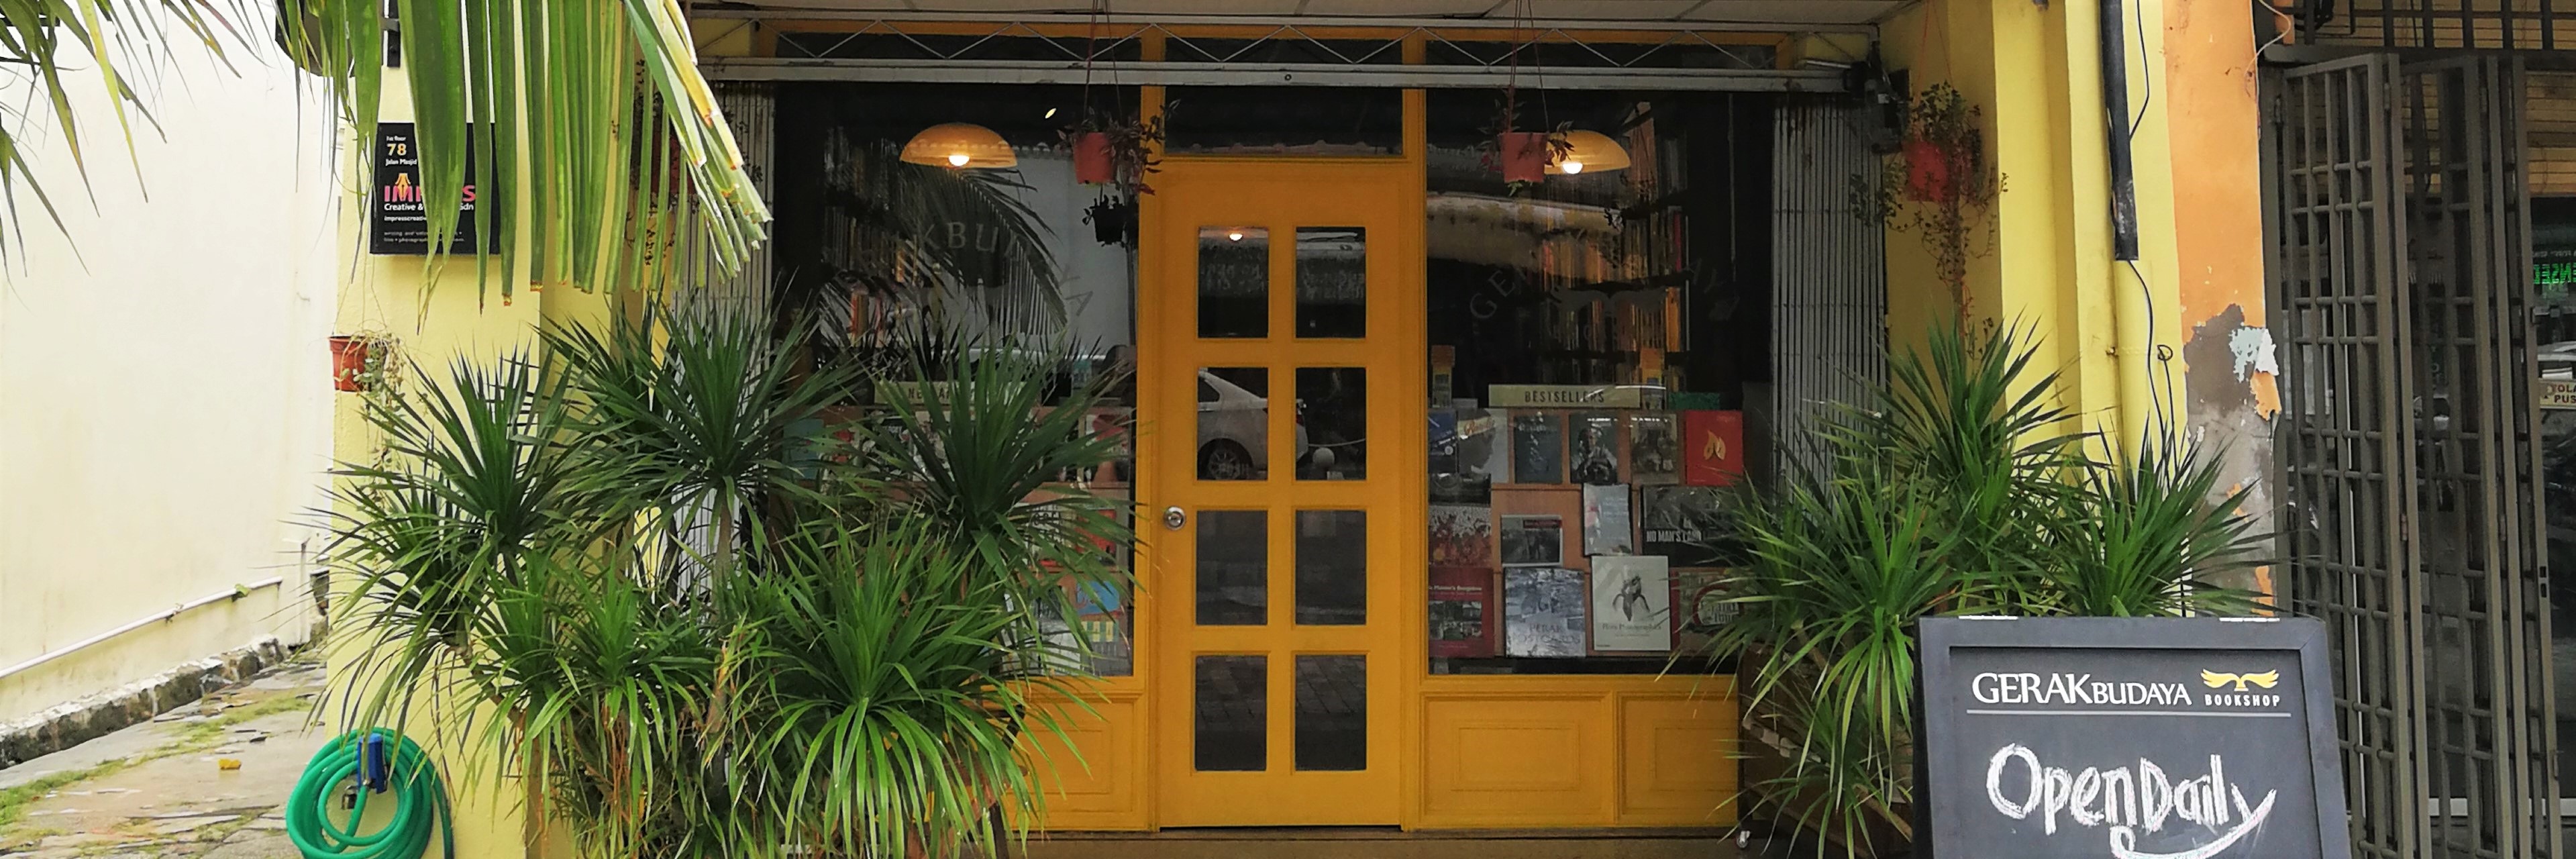 Gerakbudaya is a beloved independent bookstore in Penang. Photo by Alexandra Wong